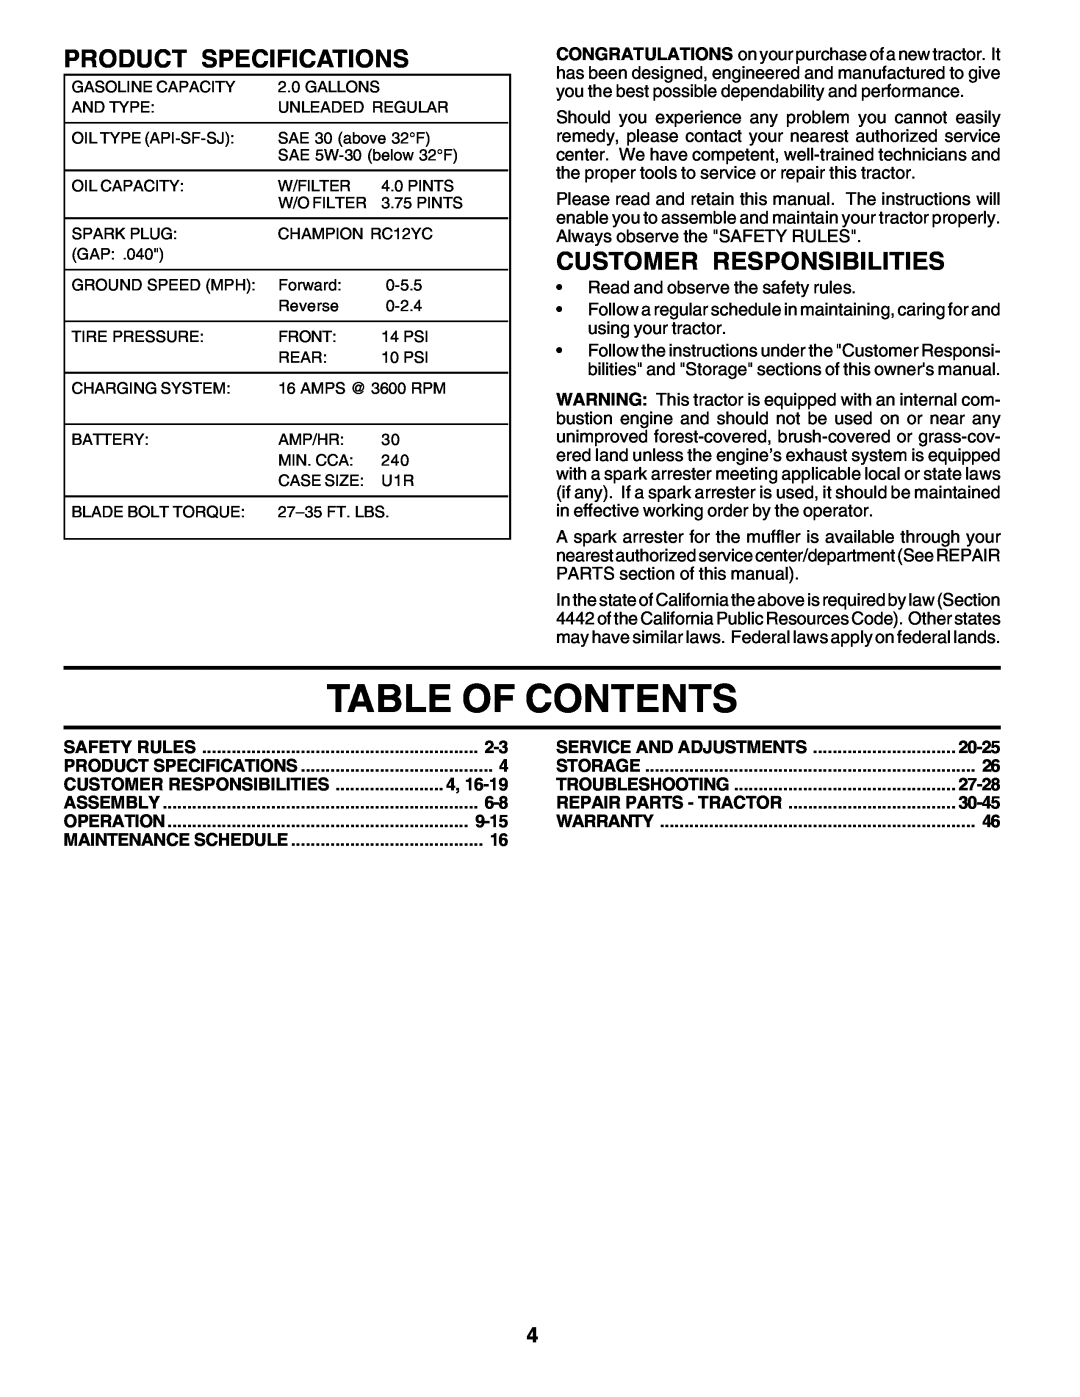 Poulan 180002 owner manual Table Of Contents, Product Specifications, Customer Responsibilities 